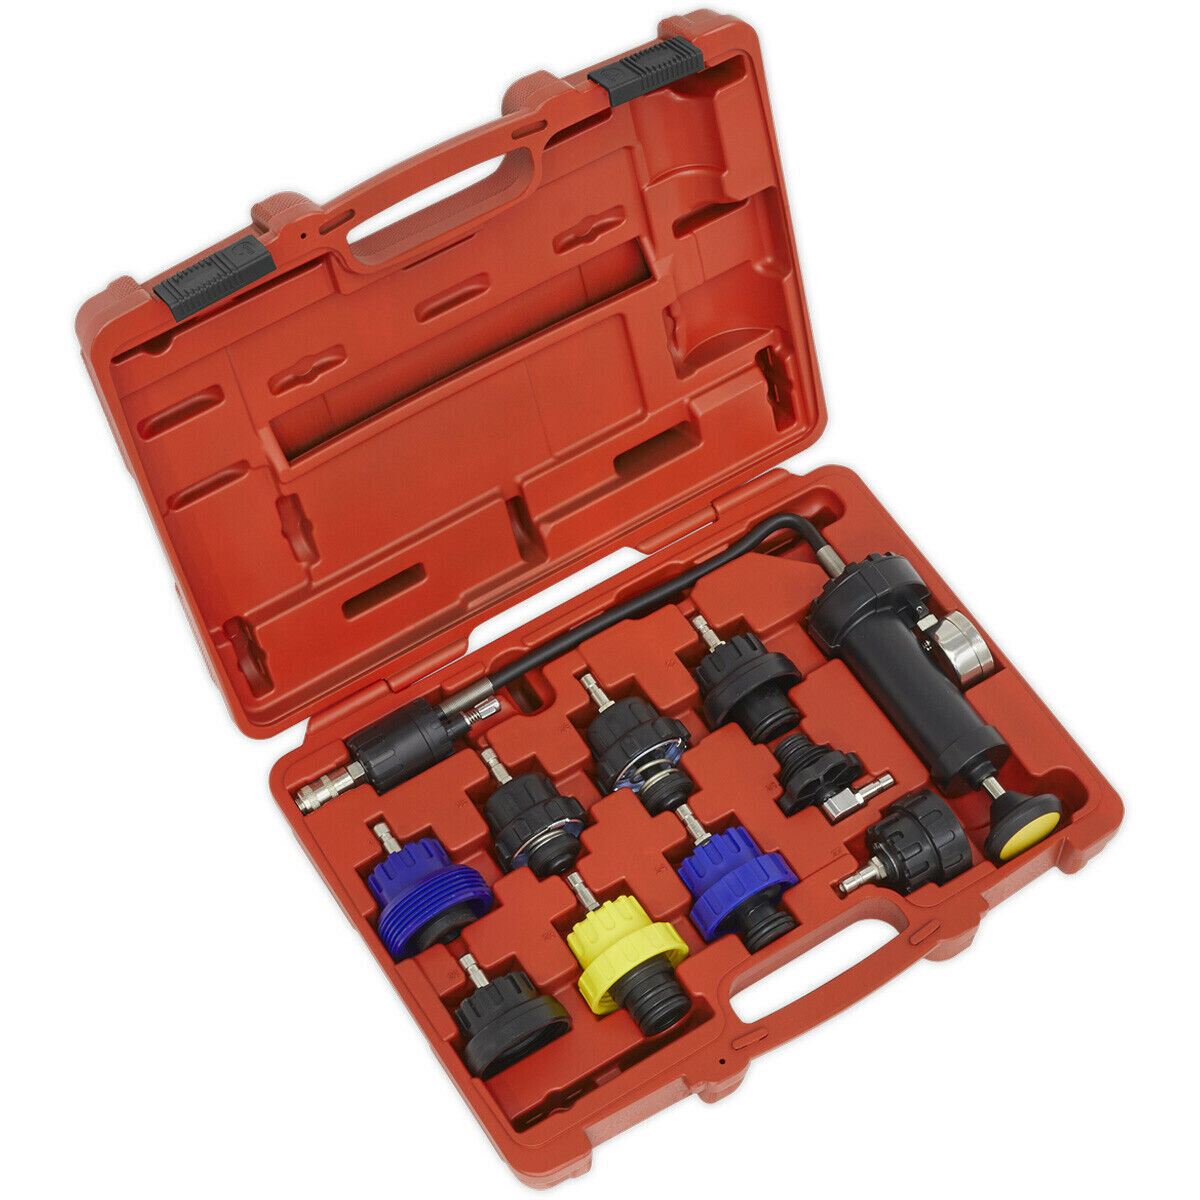 10 Piece Cooling System Pressure Test Kit - Vehicle Specific Caps - Car Testing